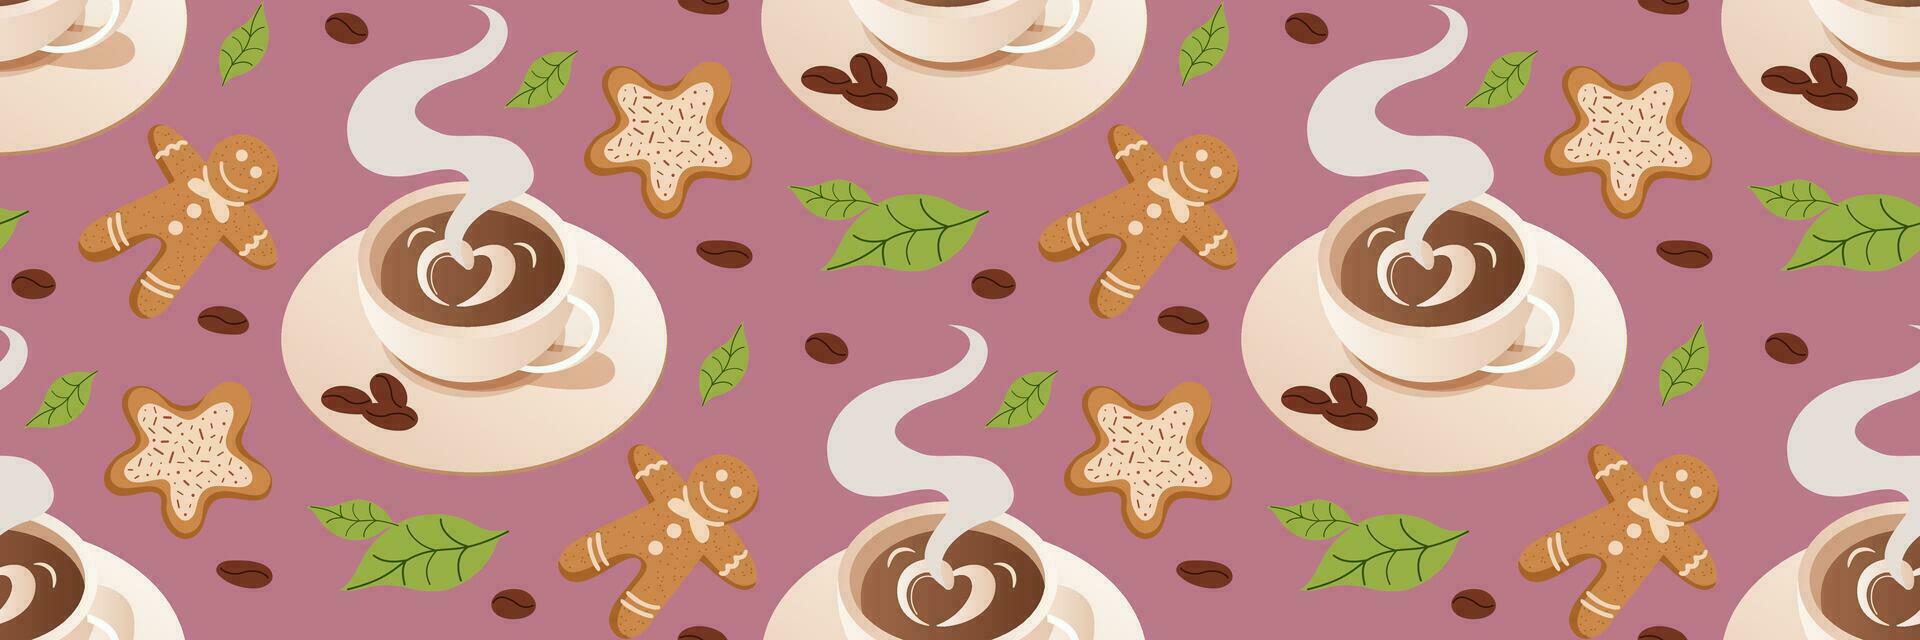 Cup of coffee and cookies Seamless Pattern. Cozy winter coffee parties. Christmas illustration. Background for coffee shops menus postcards corporate identity wrapping paper. Flat vector illustration.